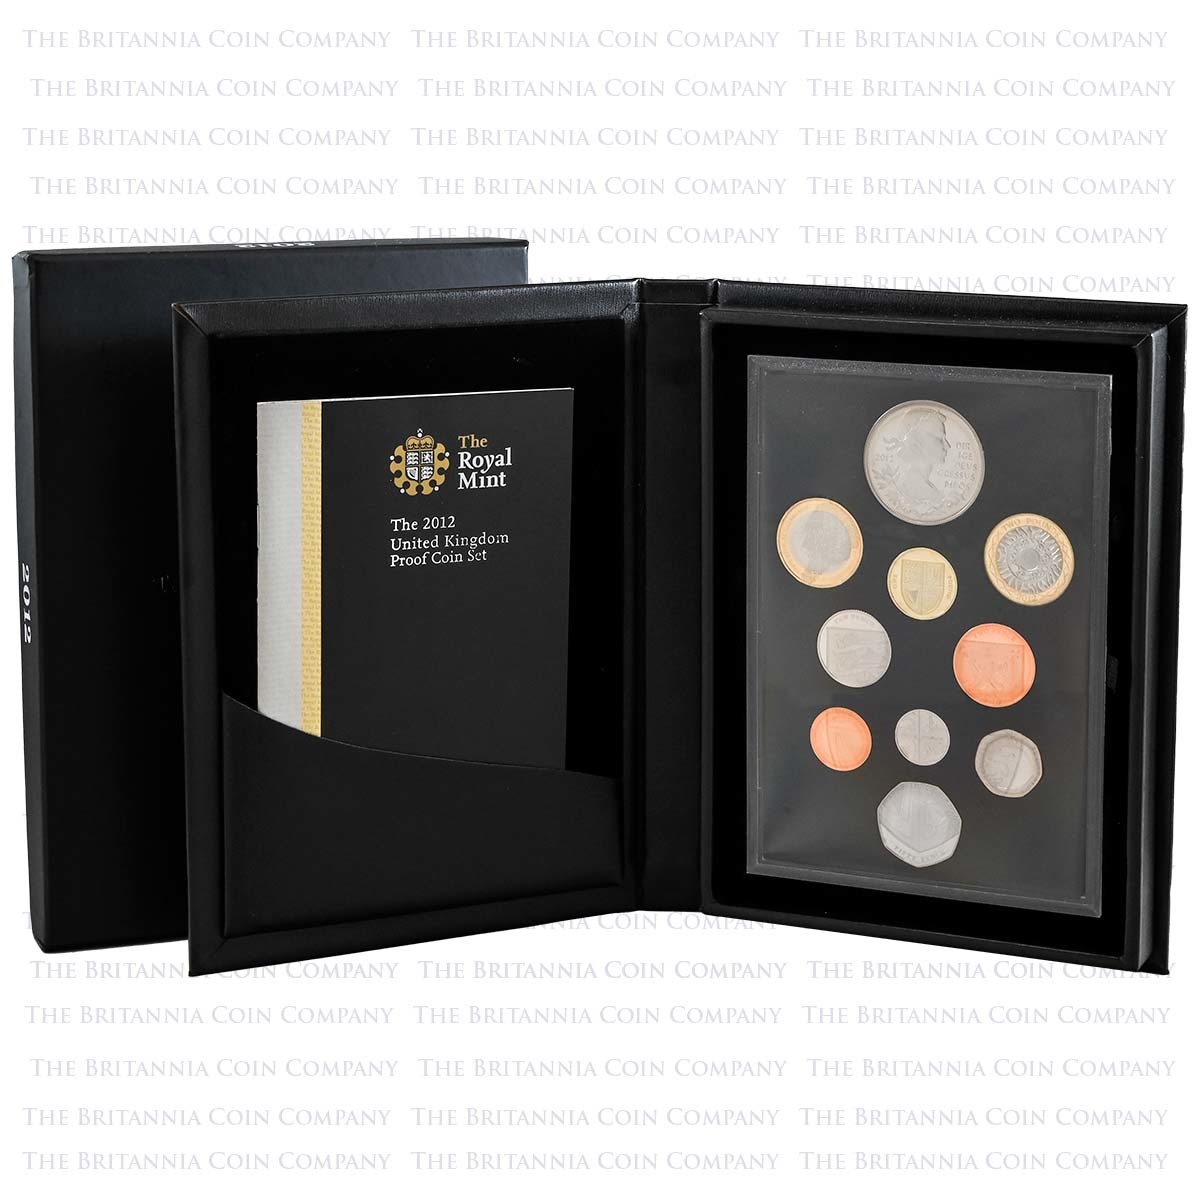 2012-proof-coin-set-001-m